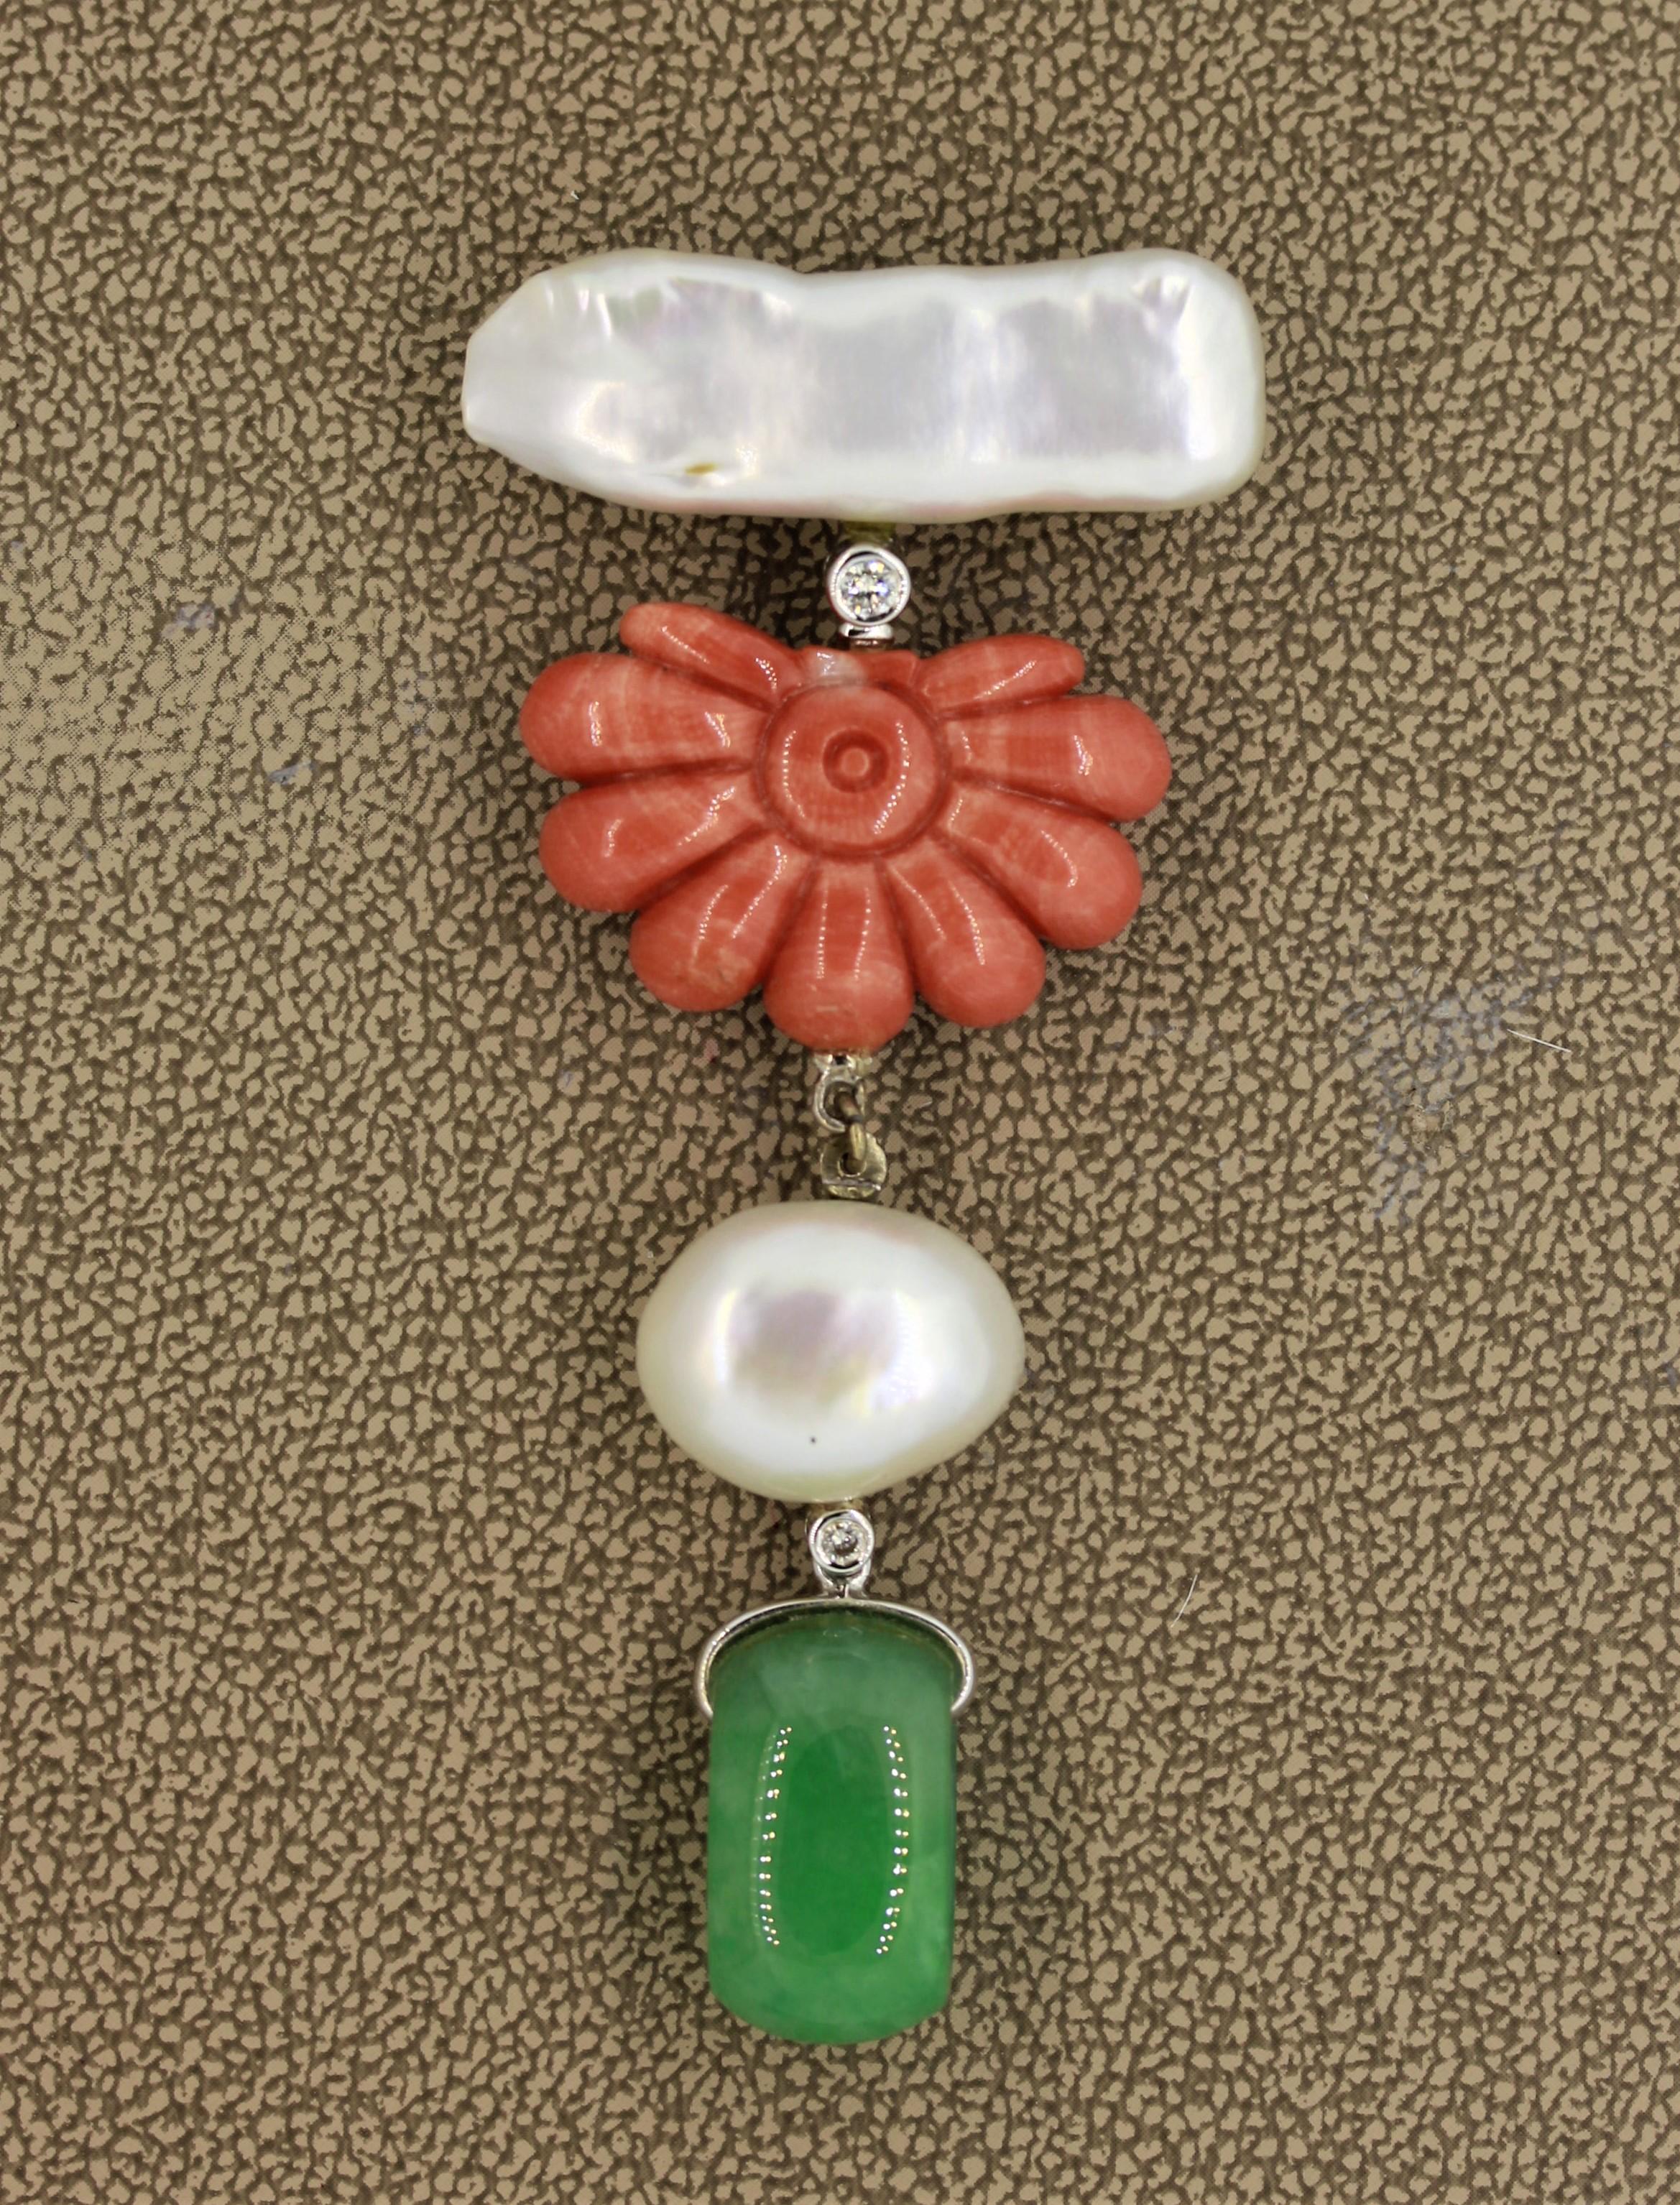 A unique brooch featuring natural materials which include 2 baroque pearls, 1 piece of hand carved coral, and a fine piece of green jadeite jade. They are accented by 2 round brilliant cut diamonds set in 18k white gold. The pieces as movement which